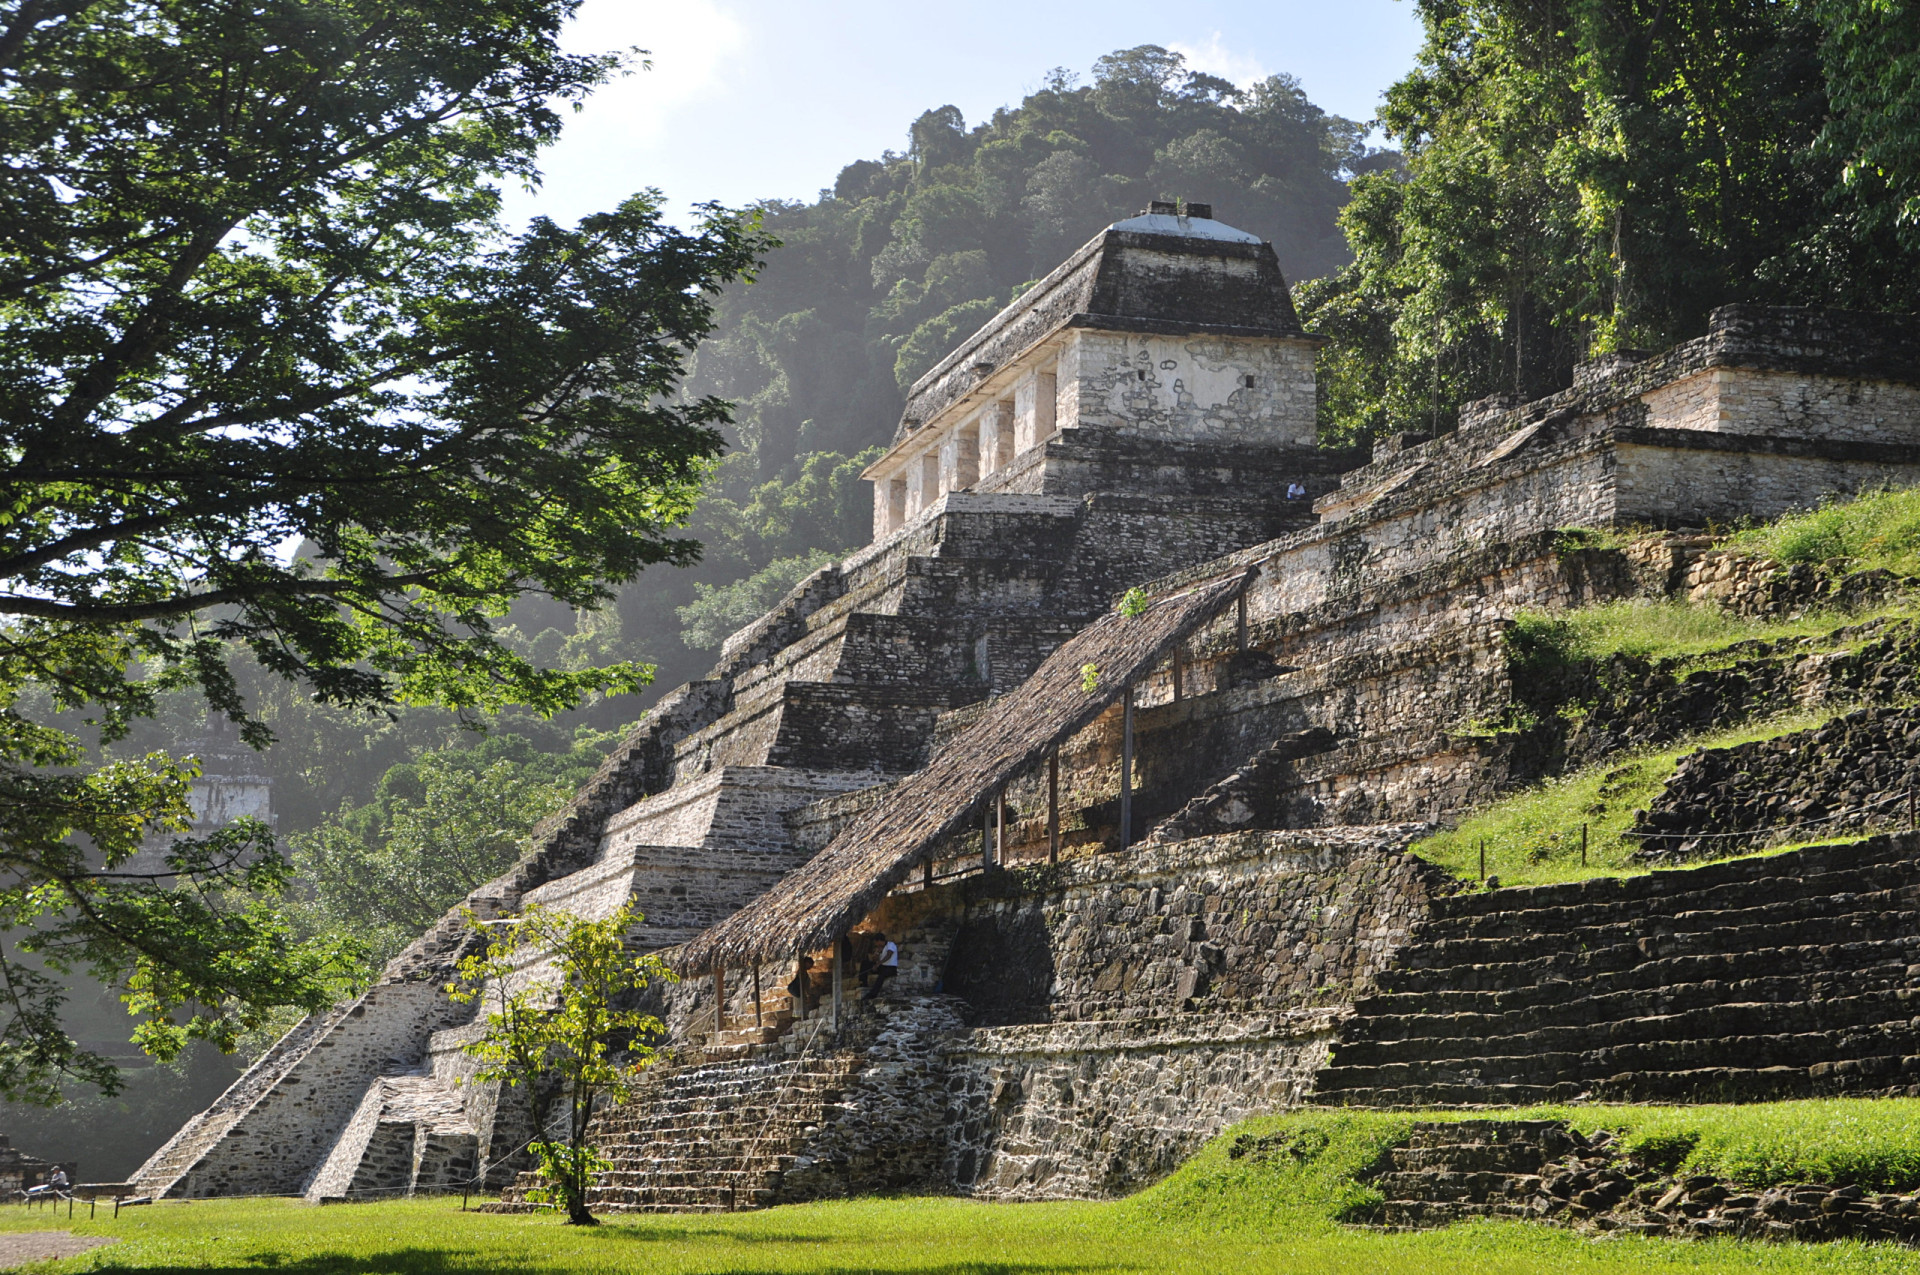 <p>The recent discovery of the Mesoamerican city of Ocomtún has added a lot of intrigue to the Maya civilization and its lost presence in Mexico. But if these archaeological revelations do not tempt you, then the area’s dry forests and scrublands surely will!</p><p>You may also like:<a href="https://www.starsinsider.com/n/401503?utm_source=msn.com&utm_medium=display&utm_campaign=referral_description&utm_content=701834en-us"> Notorious figures in Australia's criminal underworld</a></p>